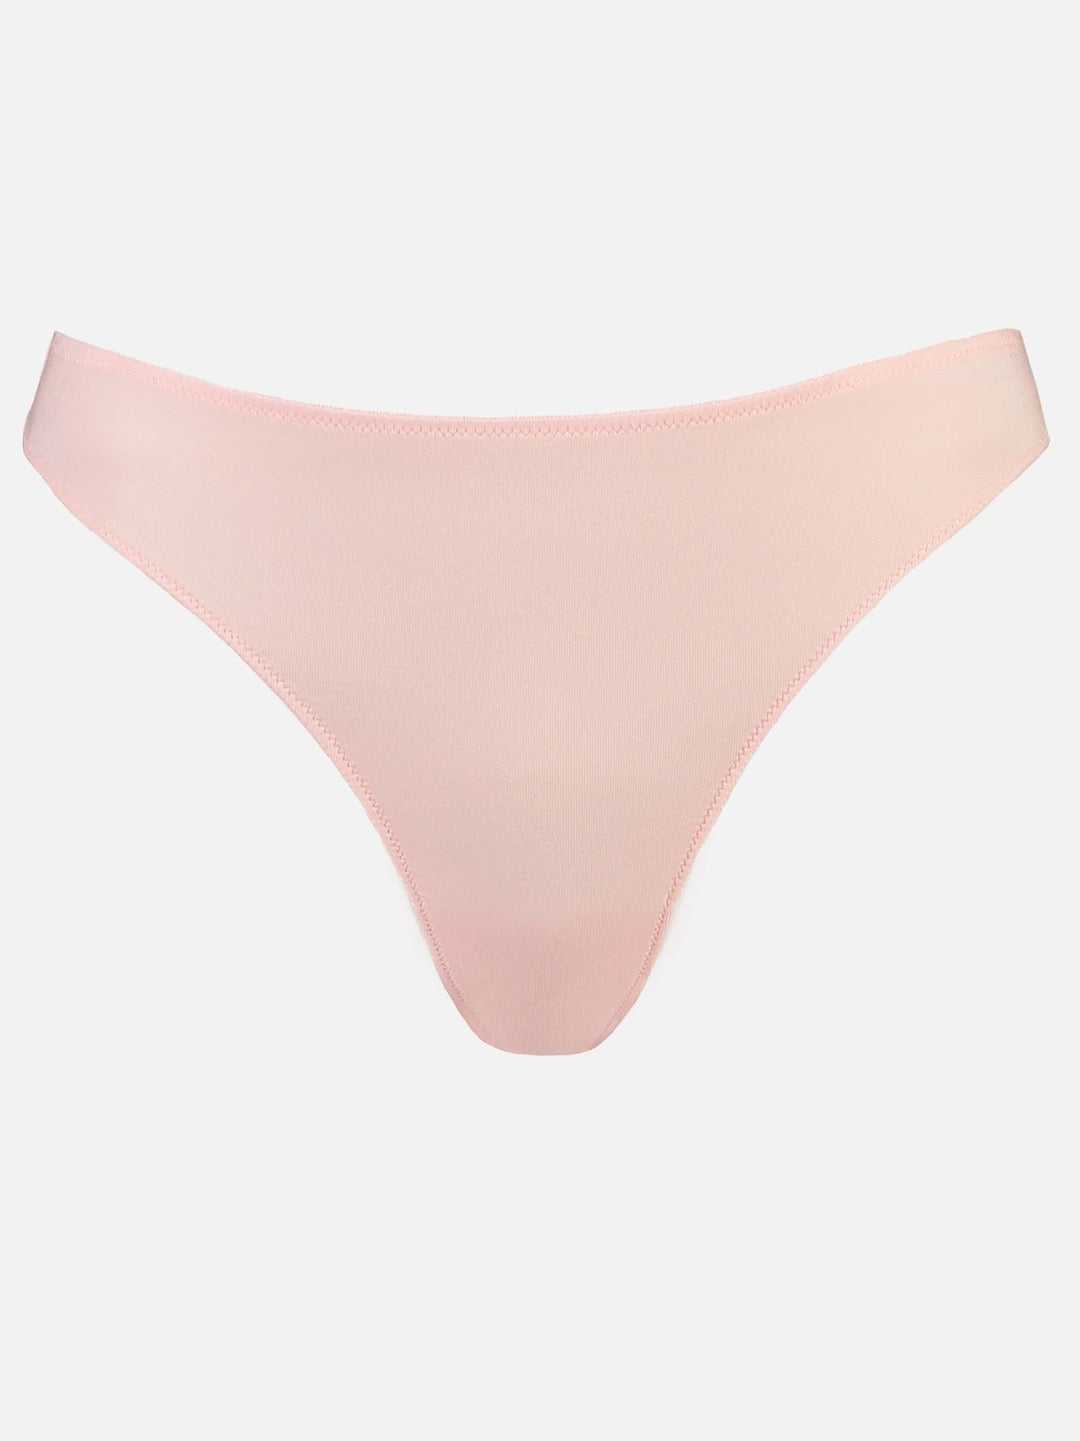 A pair of Whitney Bikini – Rosy thongs on a white background from Videris.